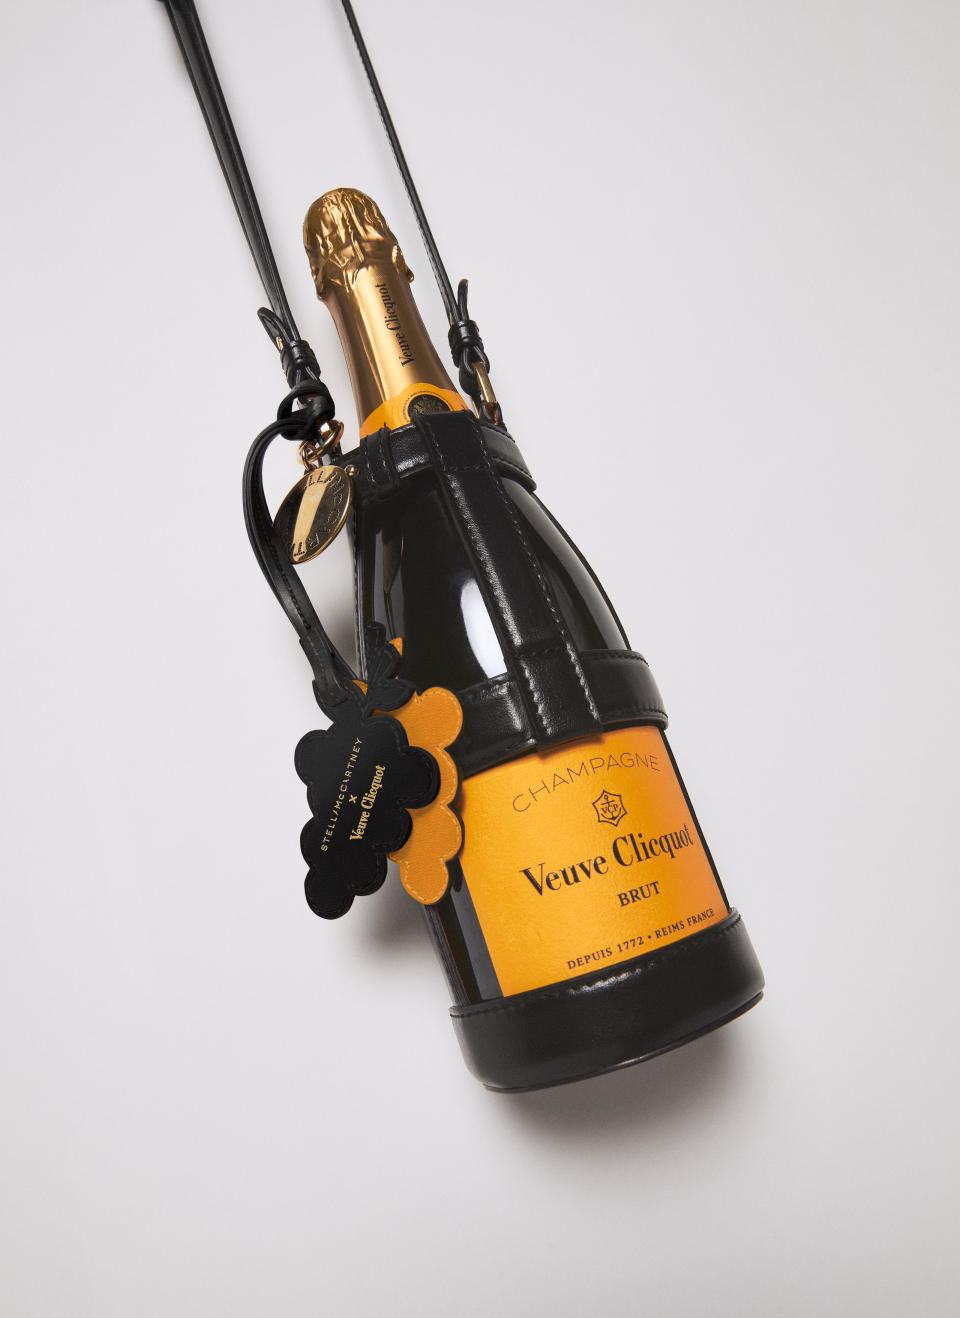 The Stella McCartney-designed Veuve Clicquot harness made from grape waste.